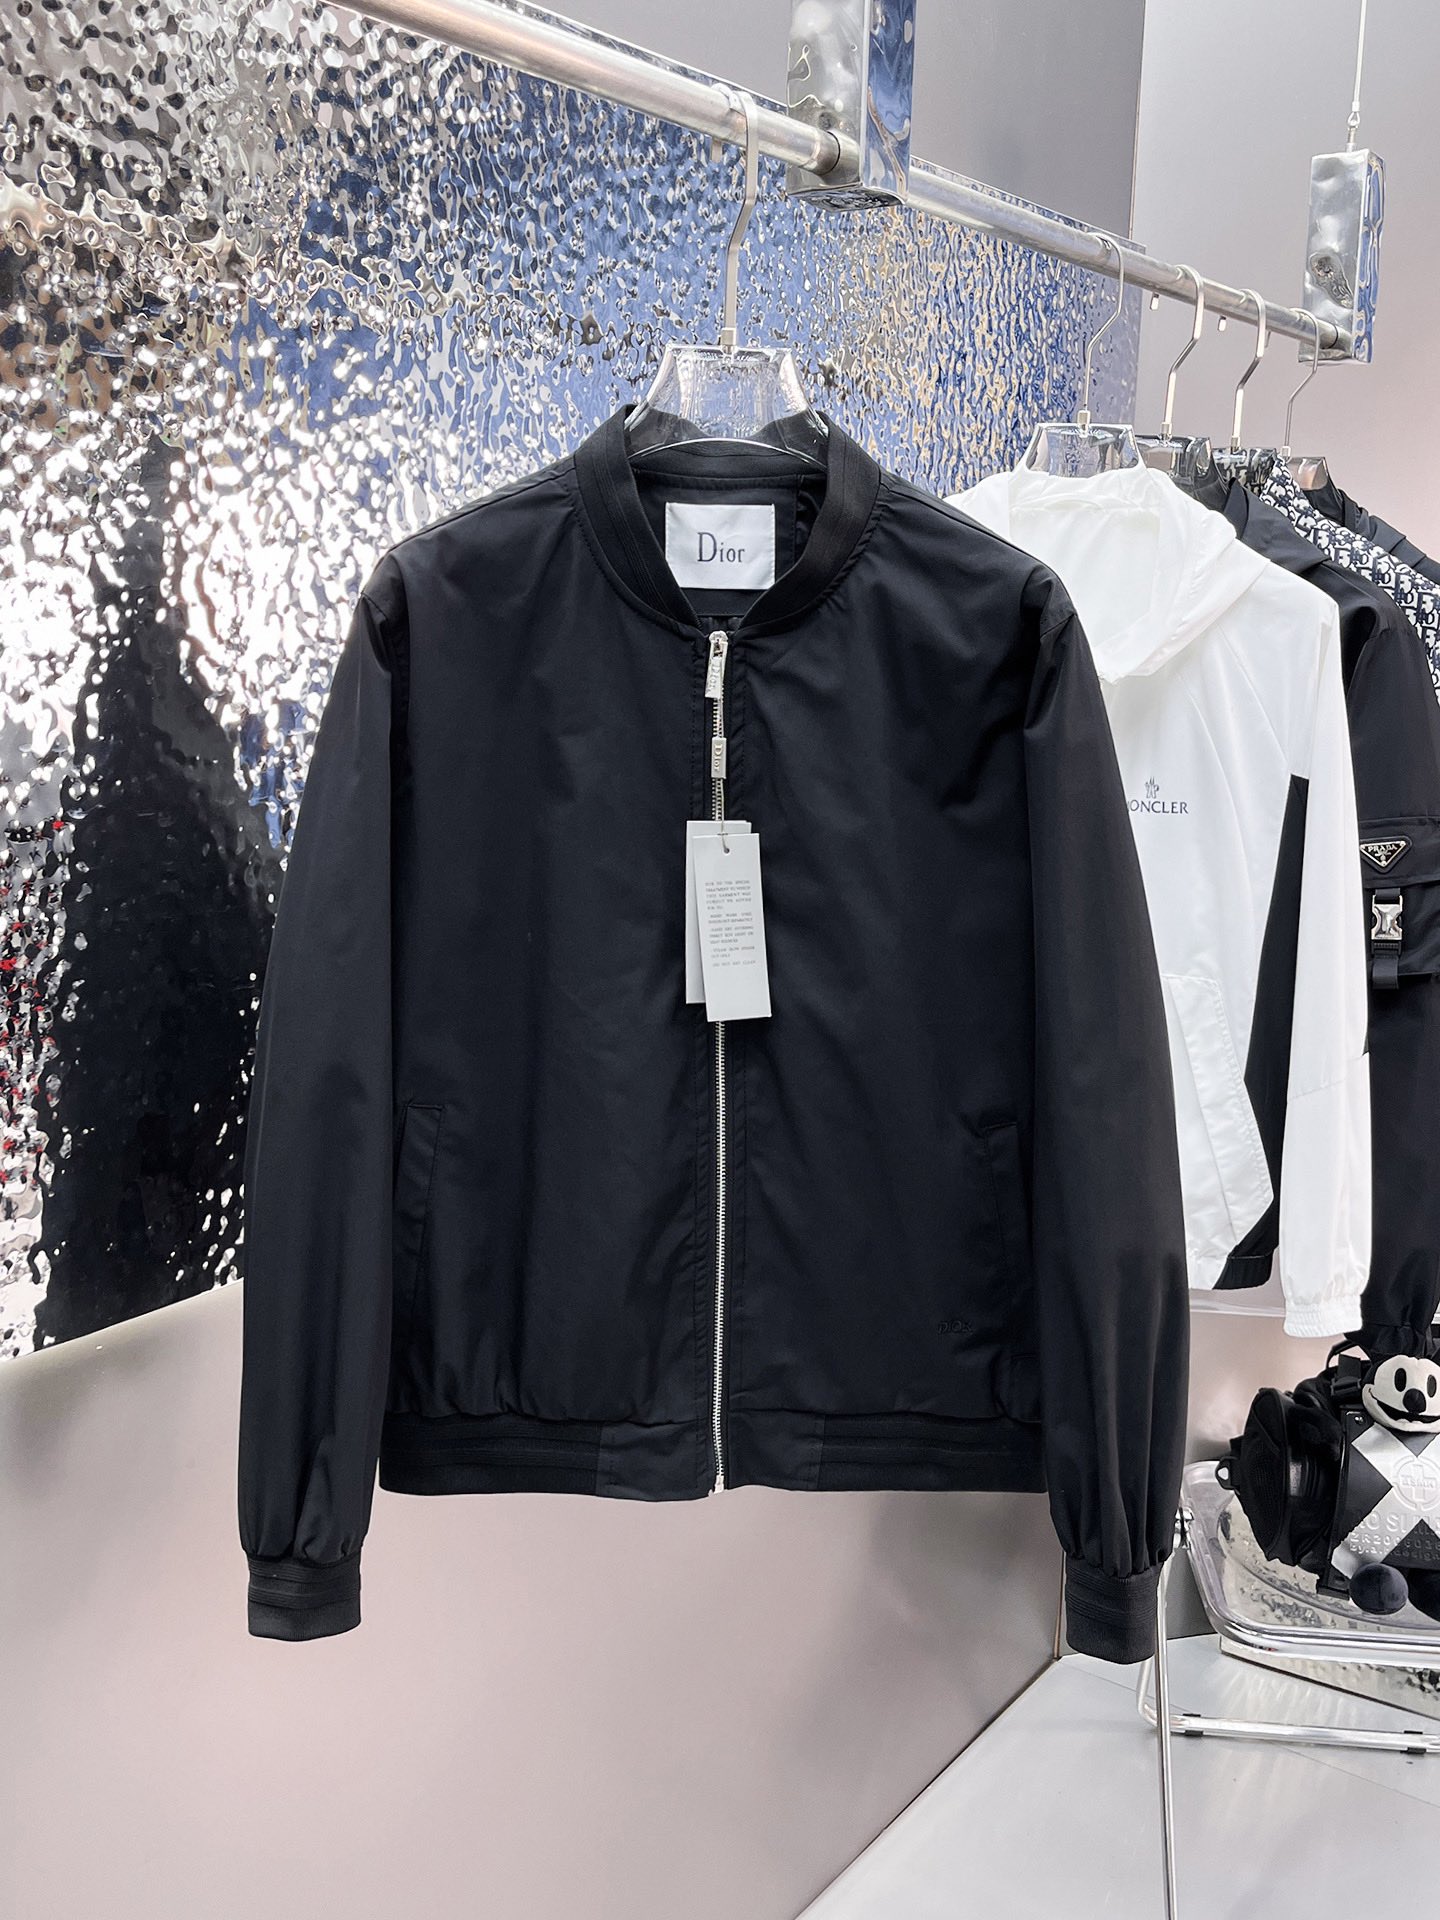 Dior Clothing Coats & Jackets Spring Collection